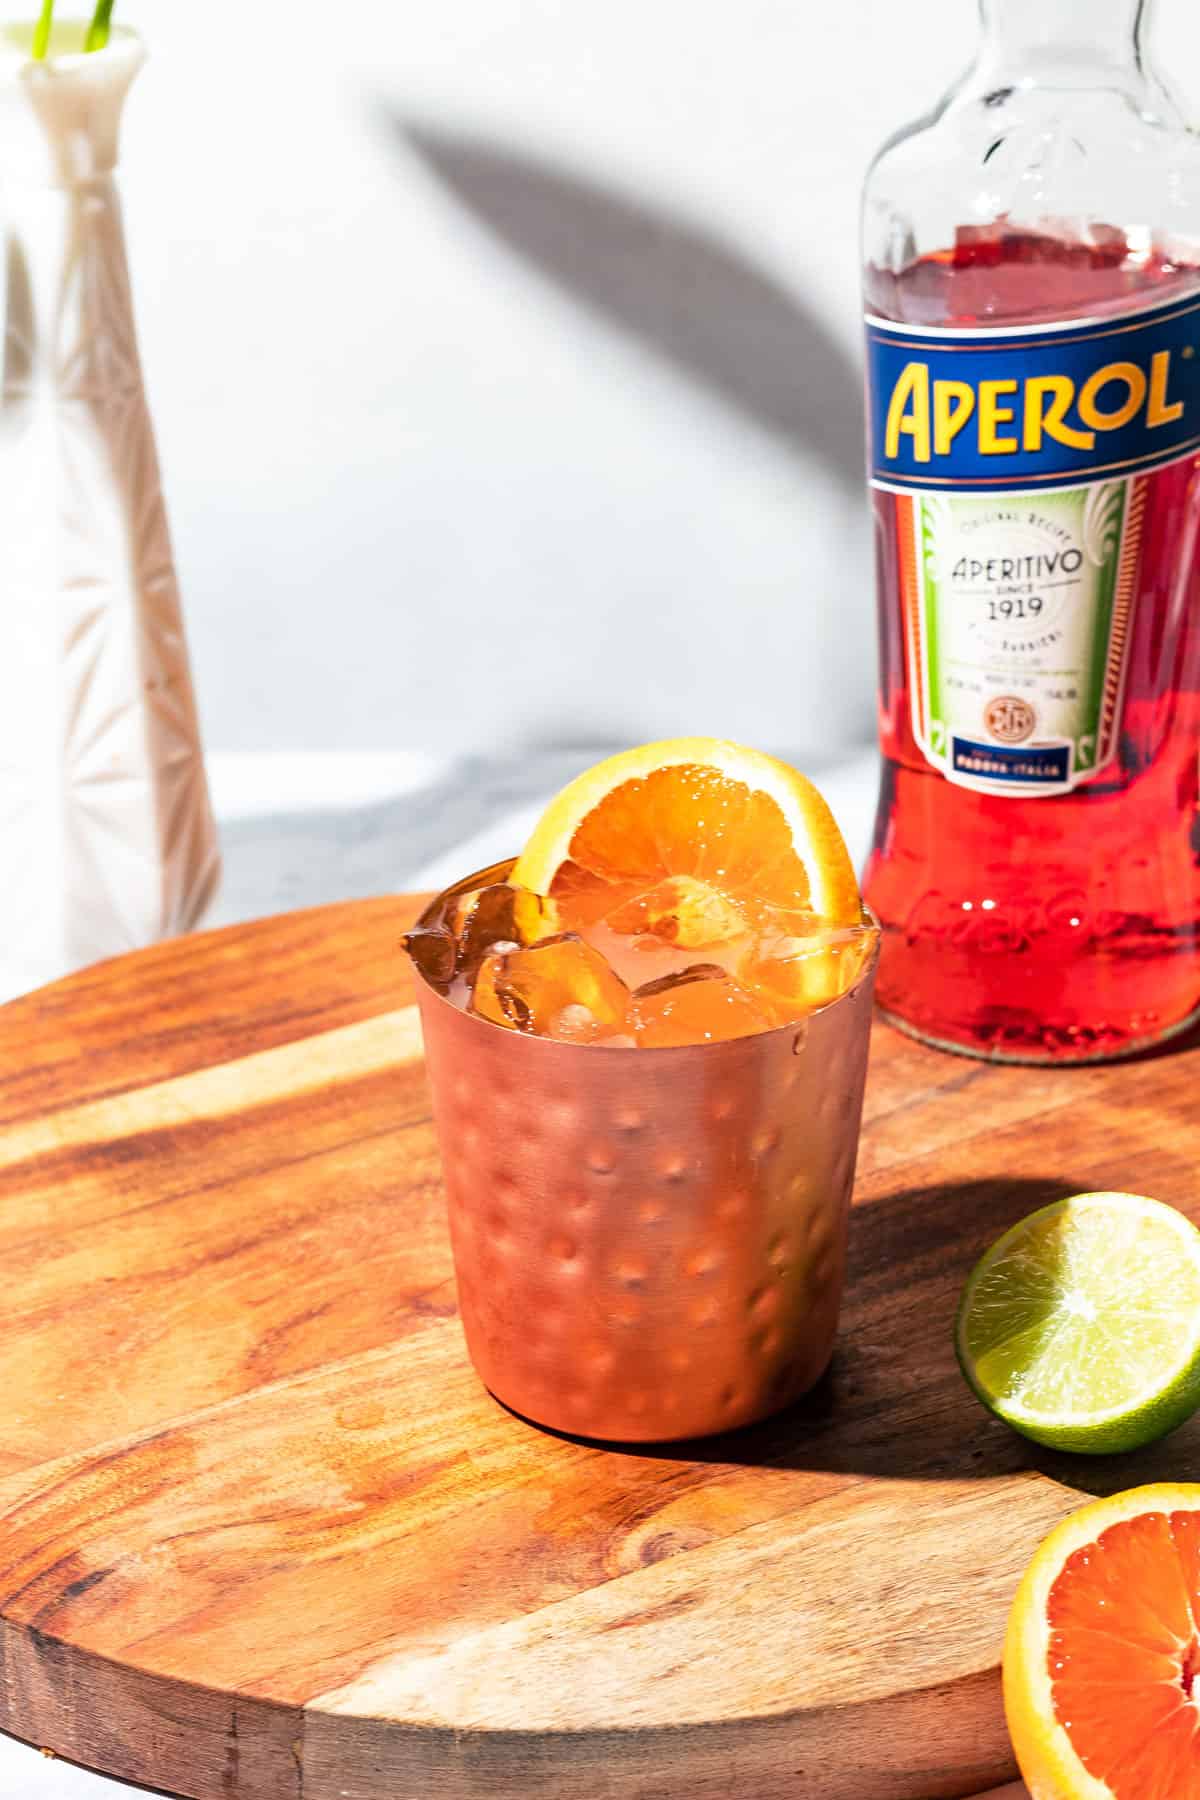 Mule cocktail on a wooden surface with a bottle of Aperol and citrus fruit on the side.